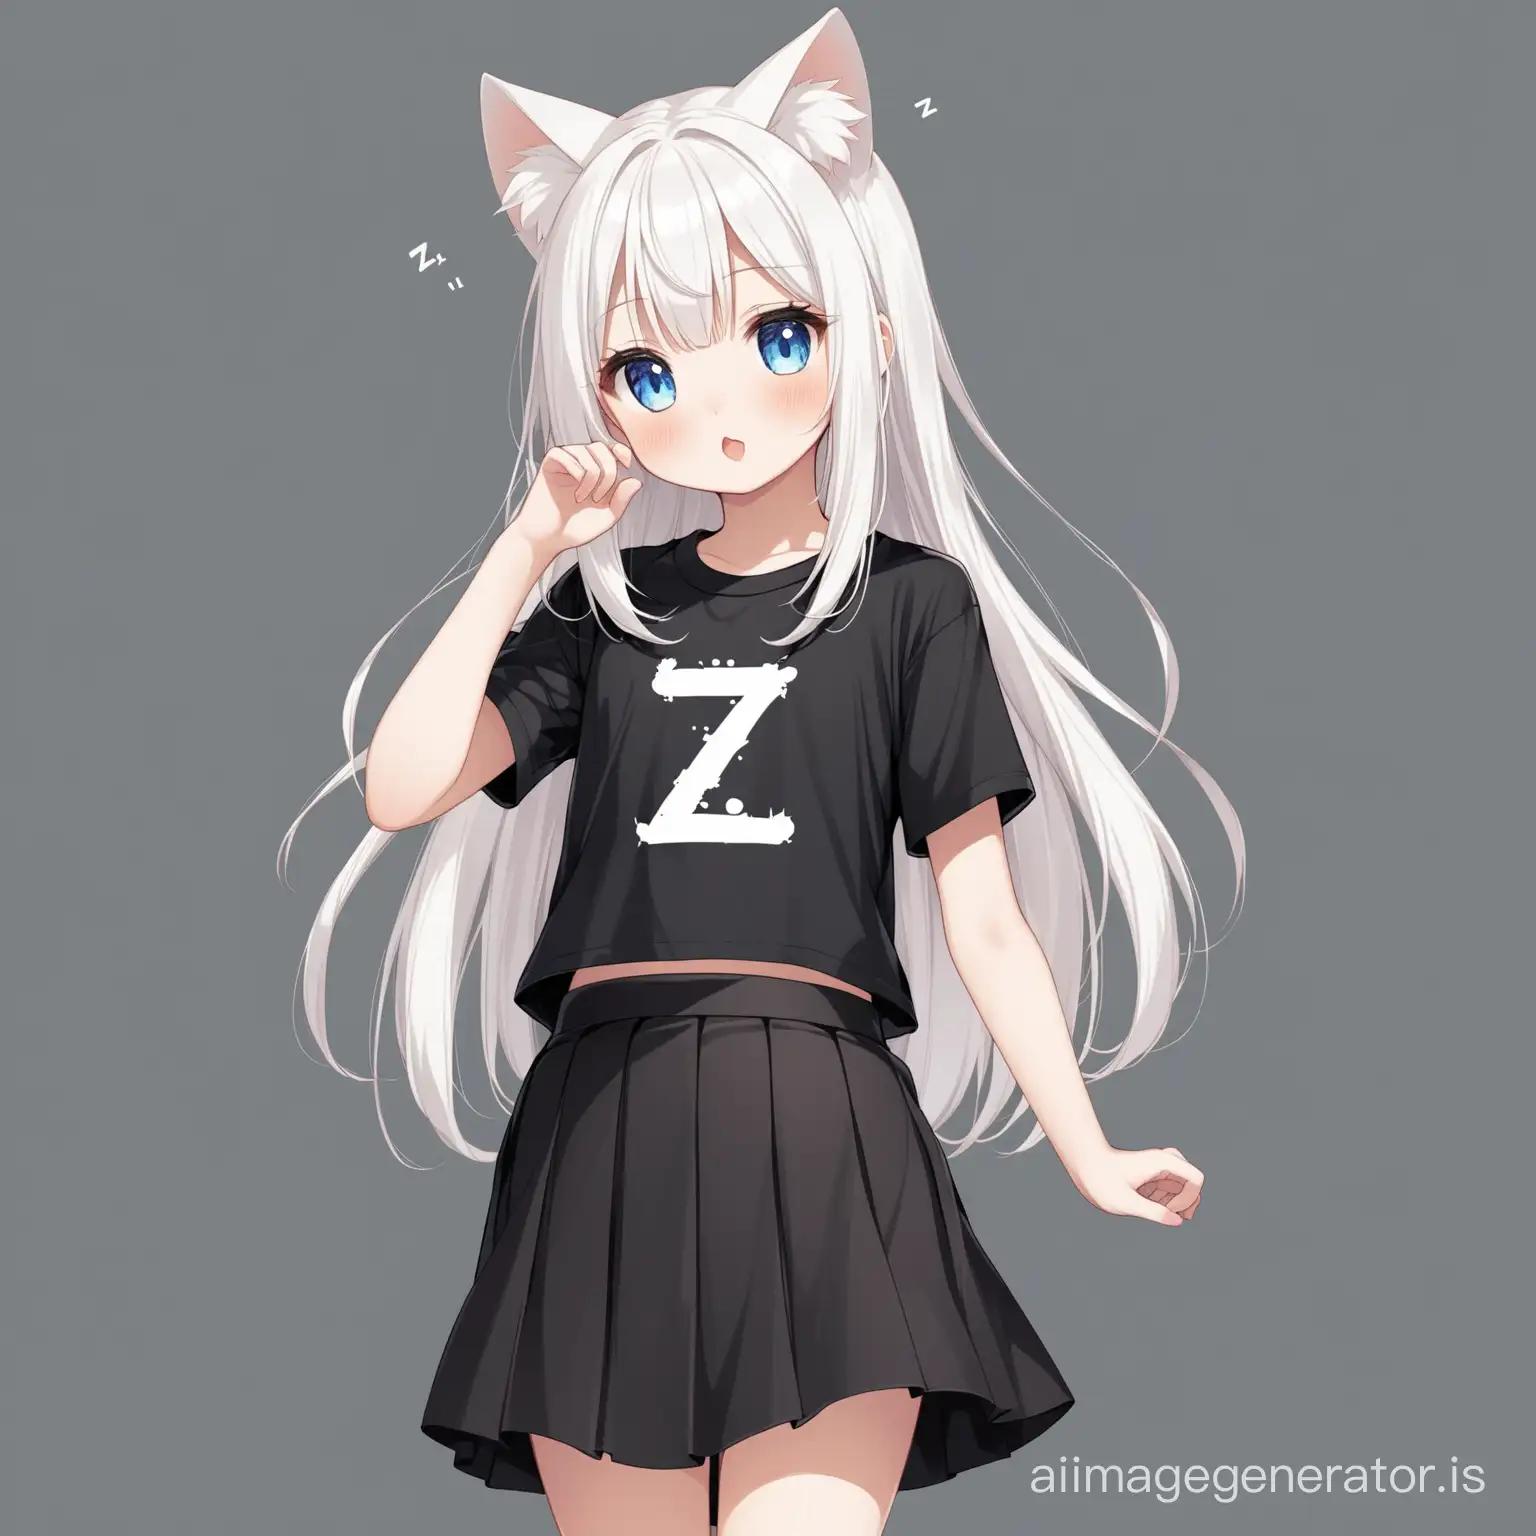 Anime-Style-Portrait-of-a-Girl-with-Cat-Ears-and-White-Hair-Wearing-a-Black-Z-TShirt